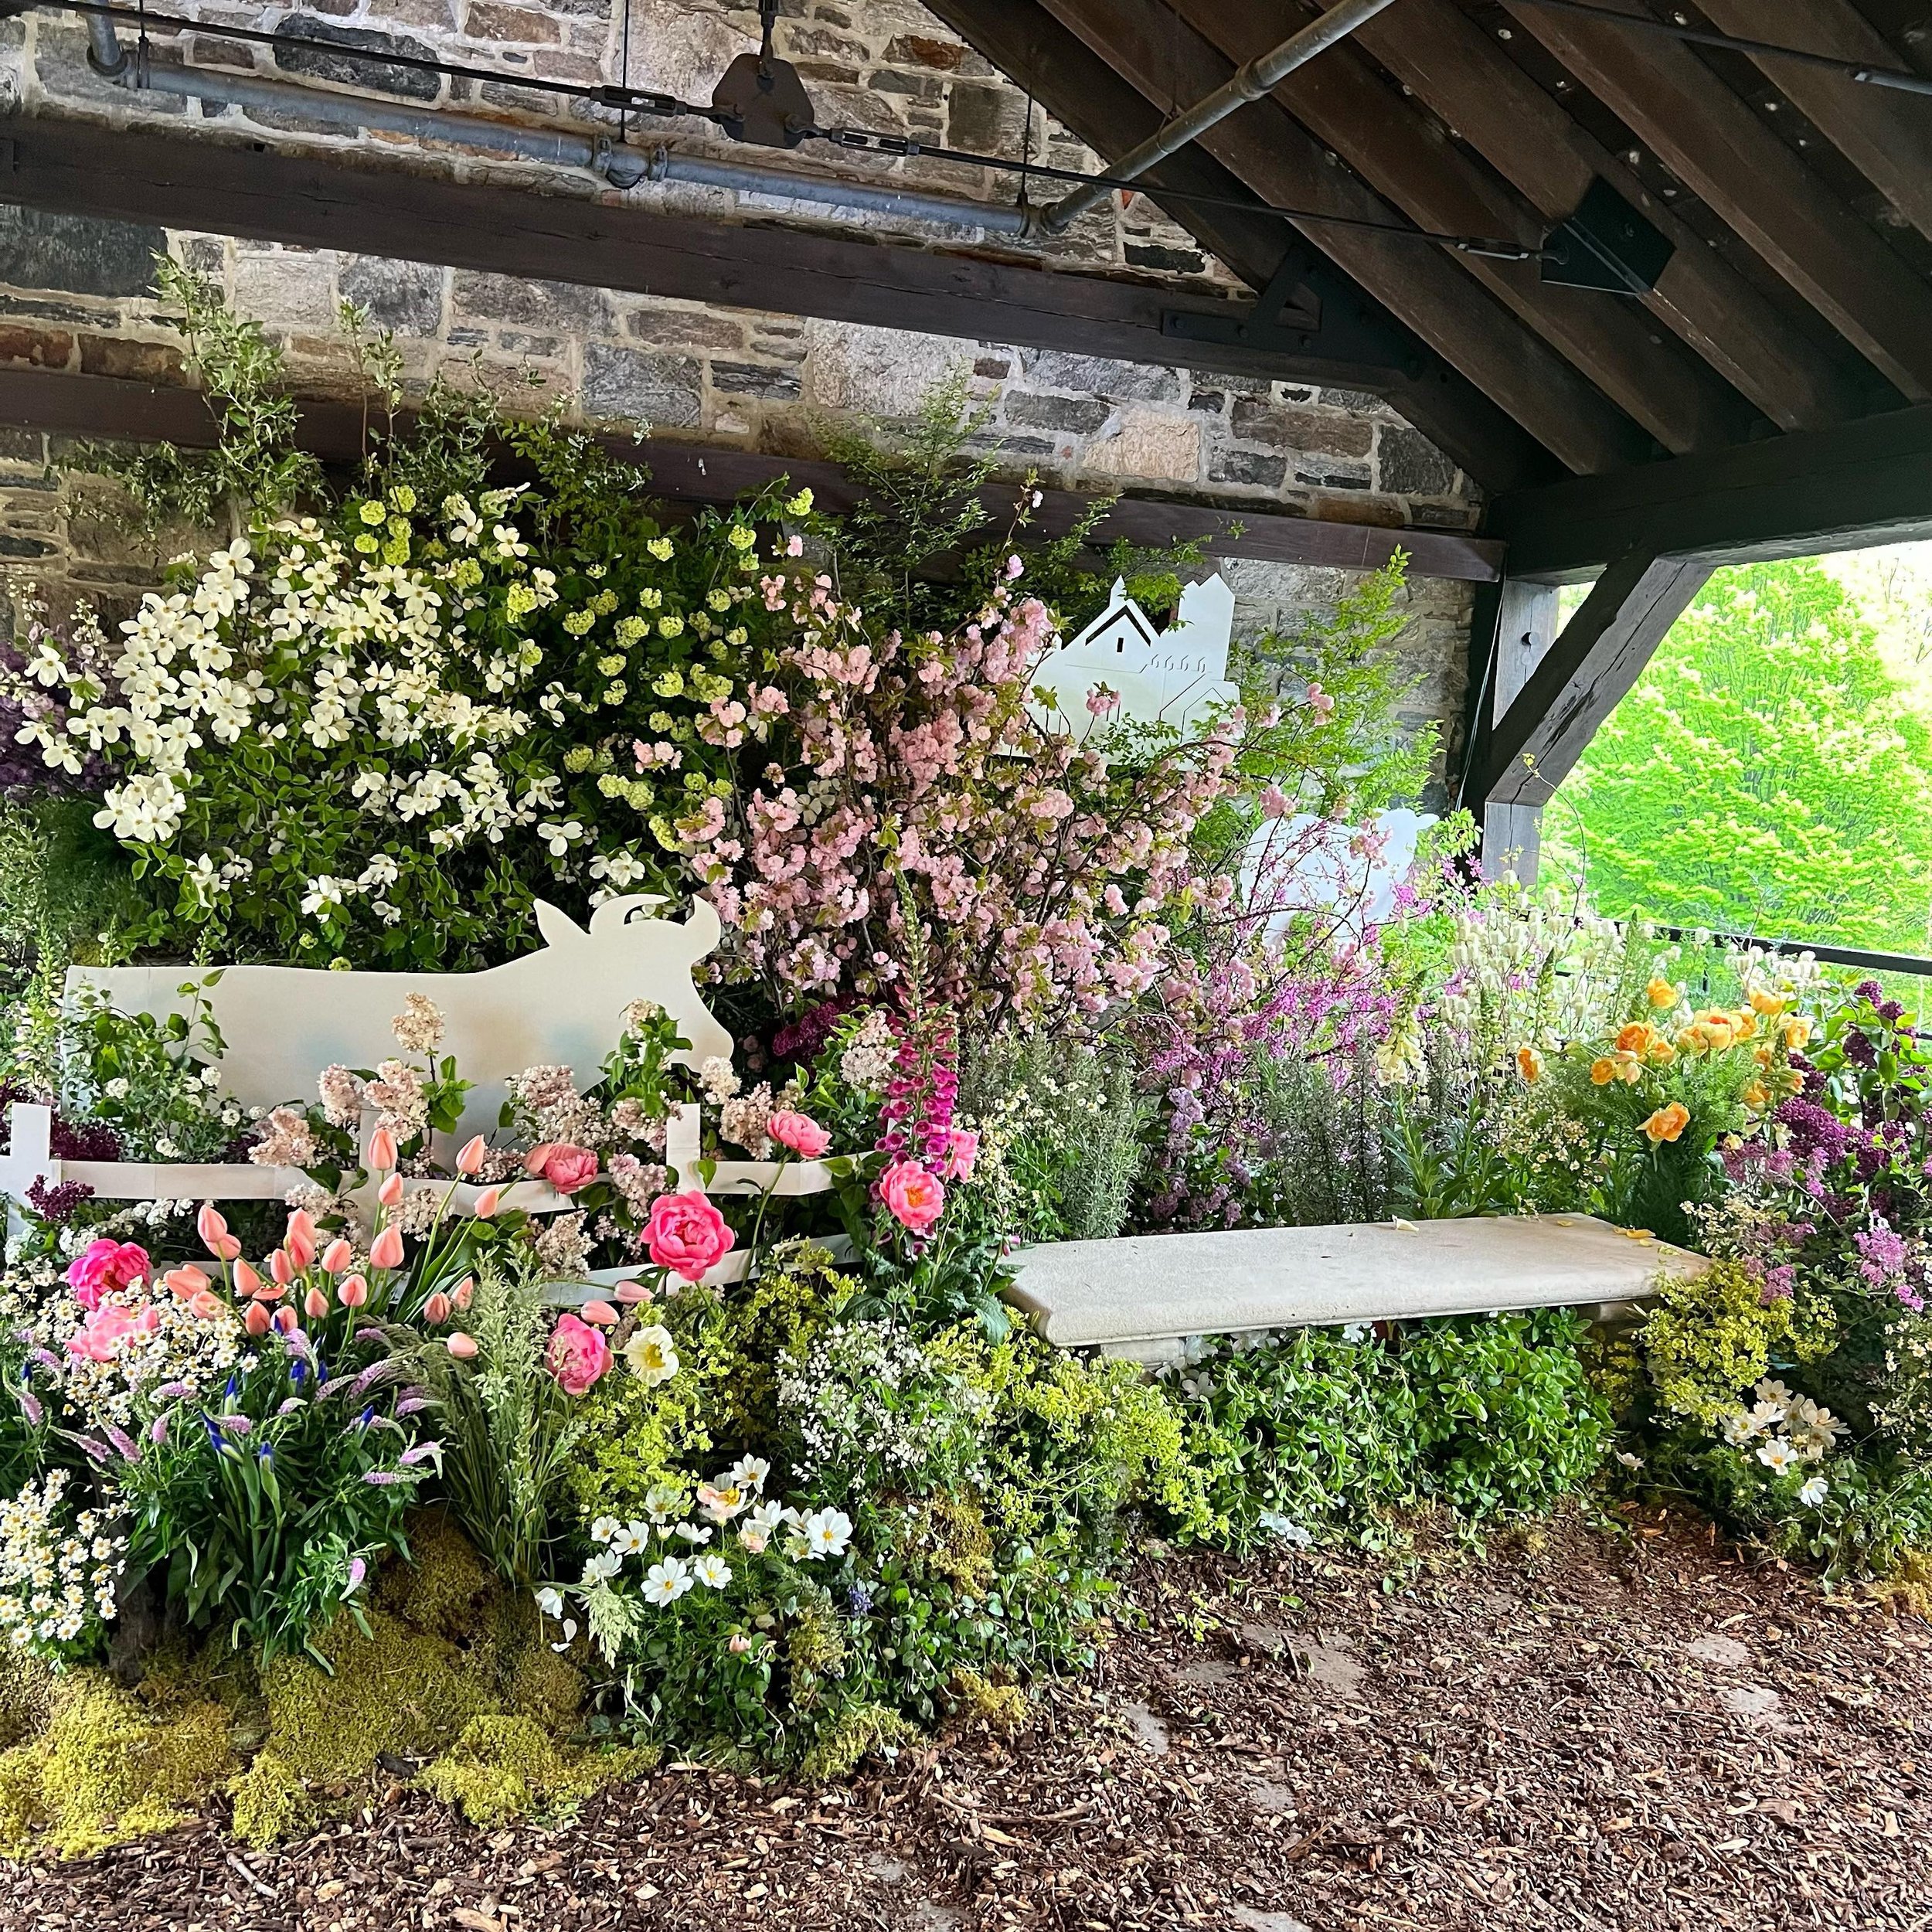 Always so fun working alongside the super talented @pgouze @bluehillfarm. I could not ask for a better floral design mentor ❤️ merci #myhappyplace #bluehillatstonebarns #springflowers #flowerwallbackdrop #floraldesign #naturalfloralstyle